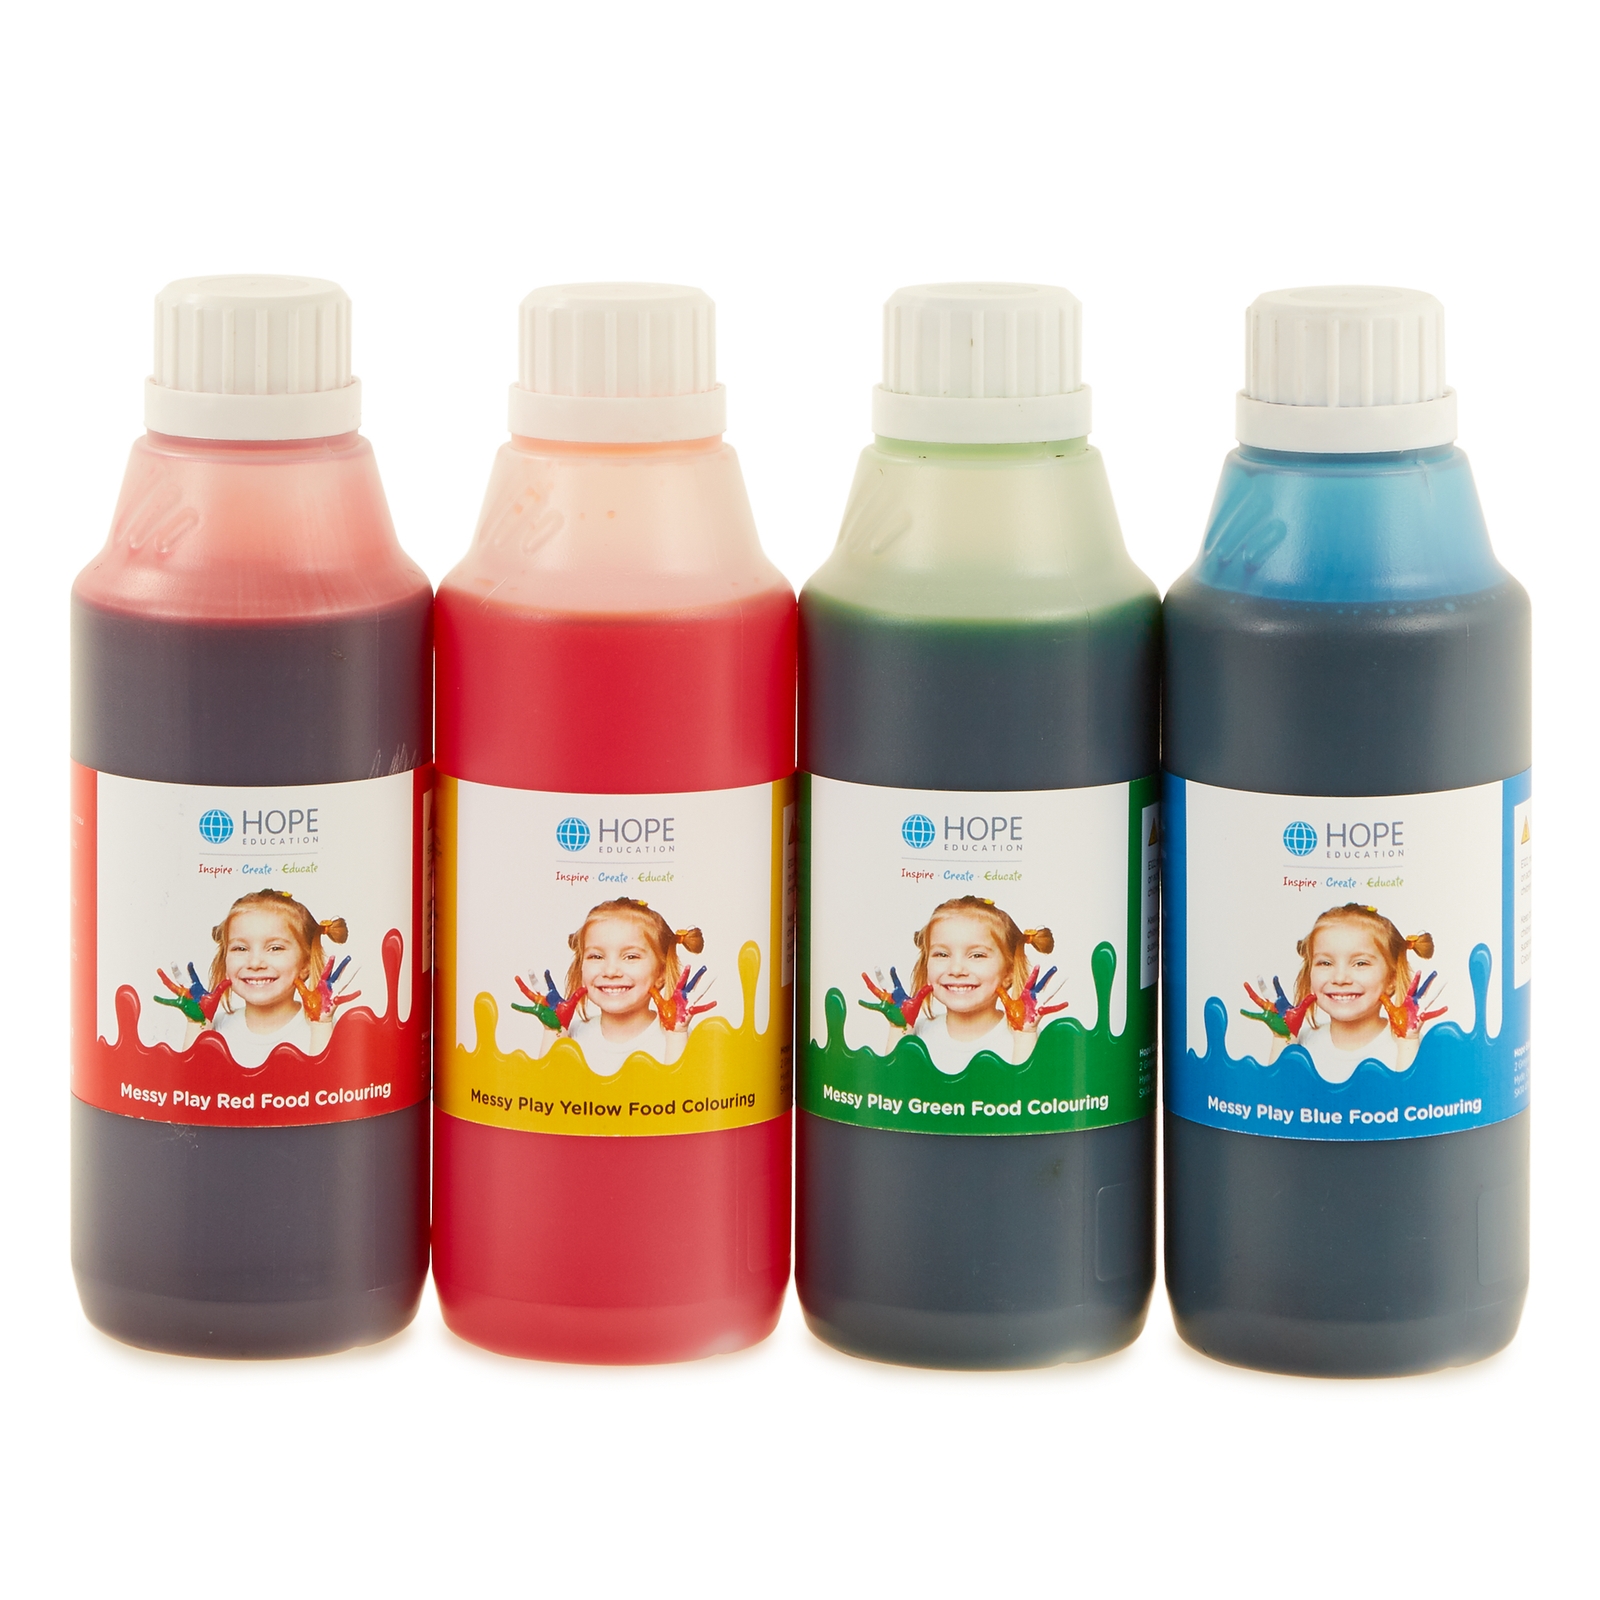 Messy/Sensory Play Food Colouring - Assorted - 500ml - Pack of 4